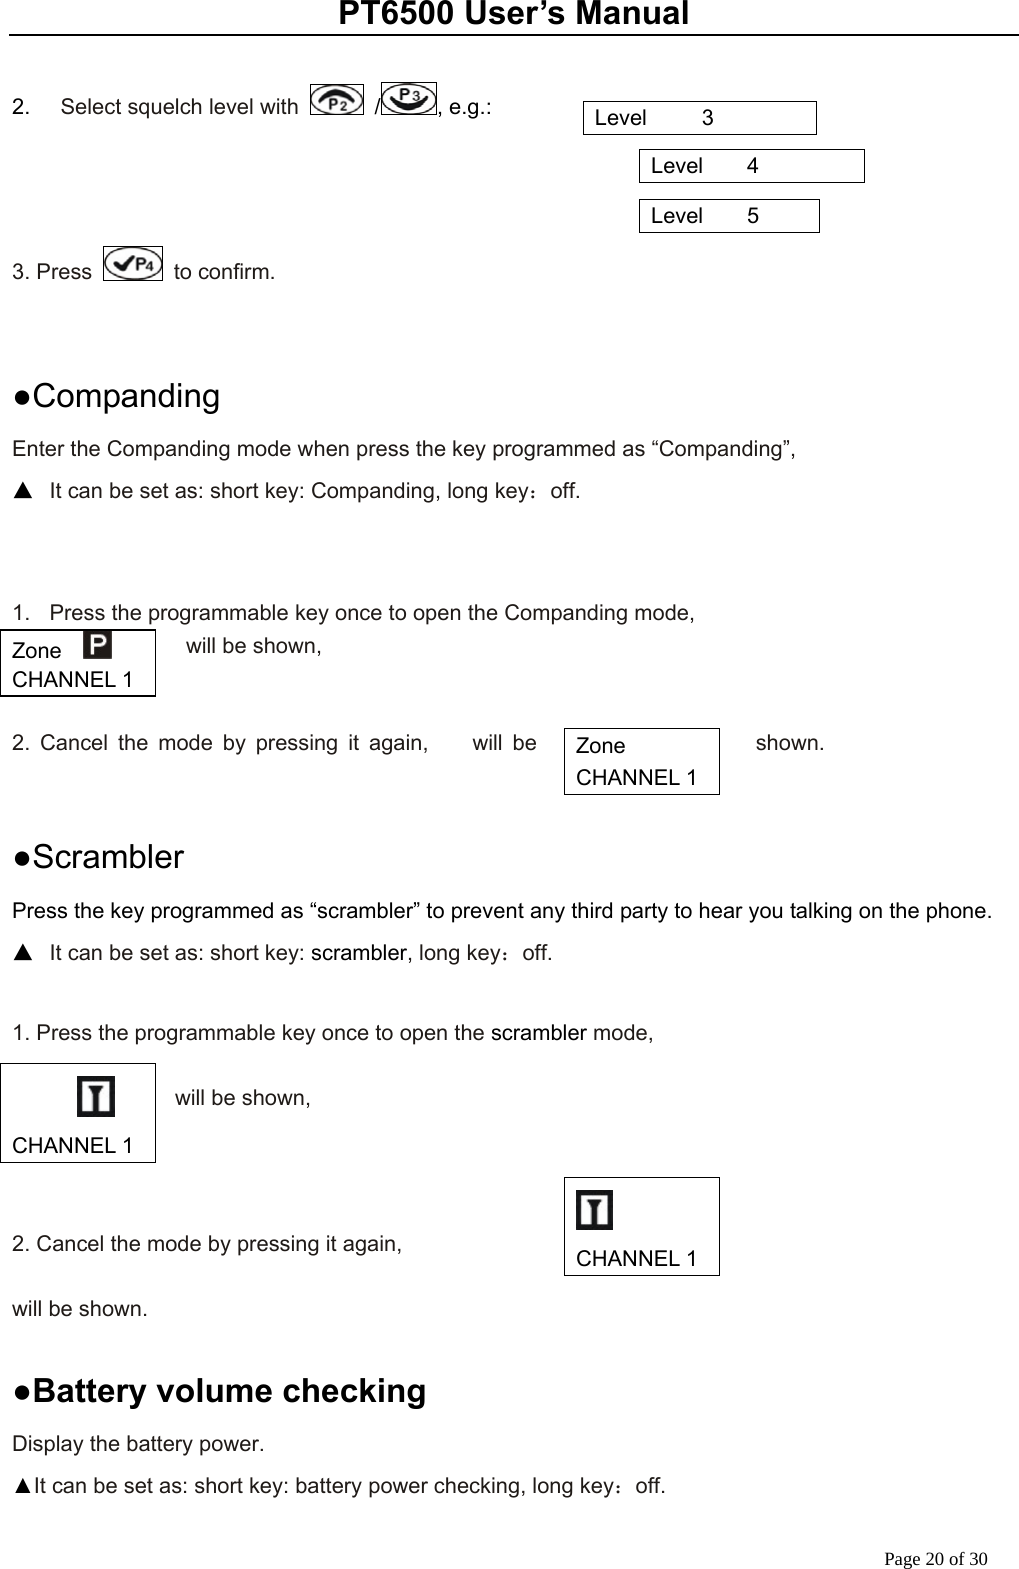 PT6500 User’s Manual Page 20 of 30  2.    Select squelch level with   / , e.g.:                                                                                        3. Press   to confirm.   ●Companding Enter the Companding mode when press the key programmed as “Companding”,   ▲  It can be set as: short key: Companding, long key：off.   1.  Press the programmable key once to open the Companding mode,           will be shown,   2. Cancel the mode by pressing it again,    will be  shown.        ●Scrambler Press the key programmed as “scrambler” to prevent any third party to hear you talking on the phone. ▲  It can be set as: short key: scrambler, long key：off.  1. Press the programmable key once to open the scrambler mode,    will be shown,    2. Cancel the mode by pressing it again,    will be shown.         ●Battery volume checking Display the battery power. ▲It can be set as: short key: battery power checking, long key：off. Level     3 Level    4 Level    5 Zone    CHANNEL 1 Zone   CHANNEL 1     CHANNEL 1  CHANNEL 1 